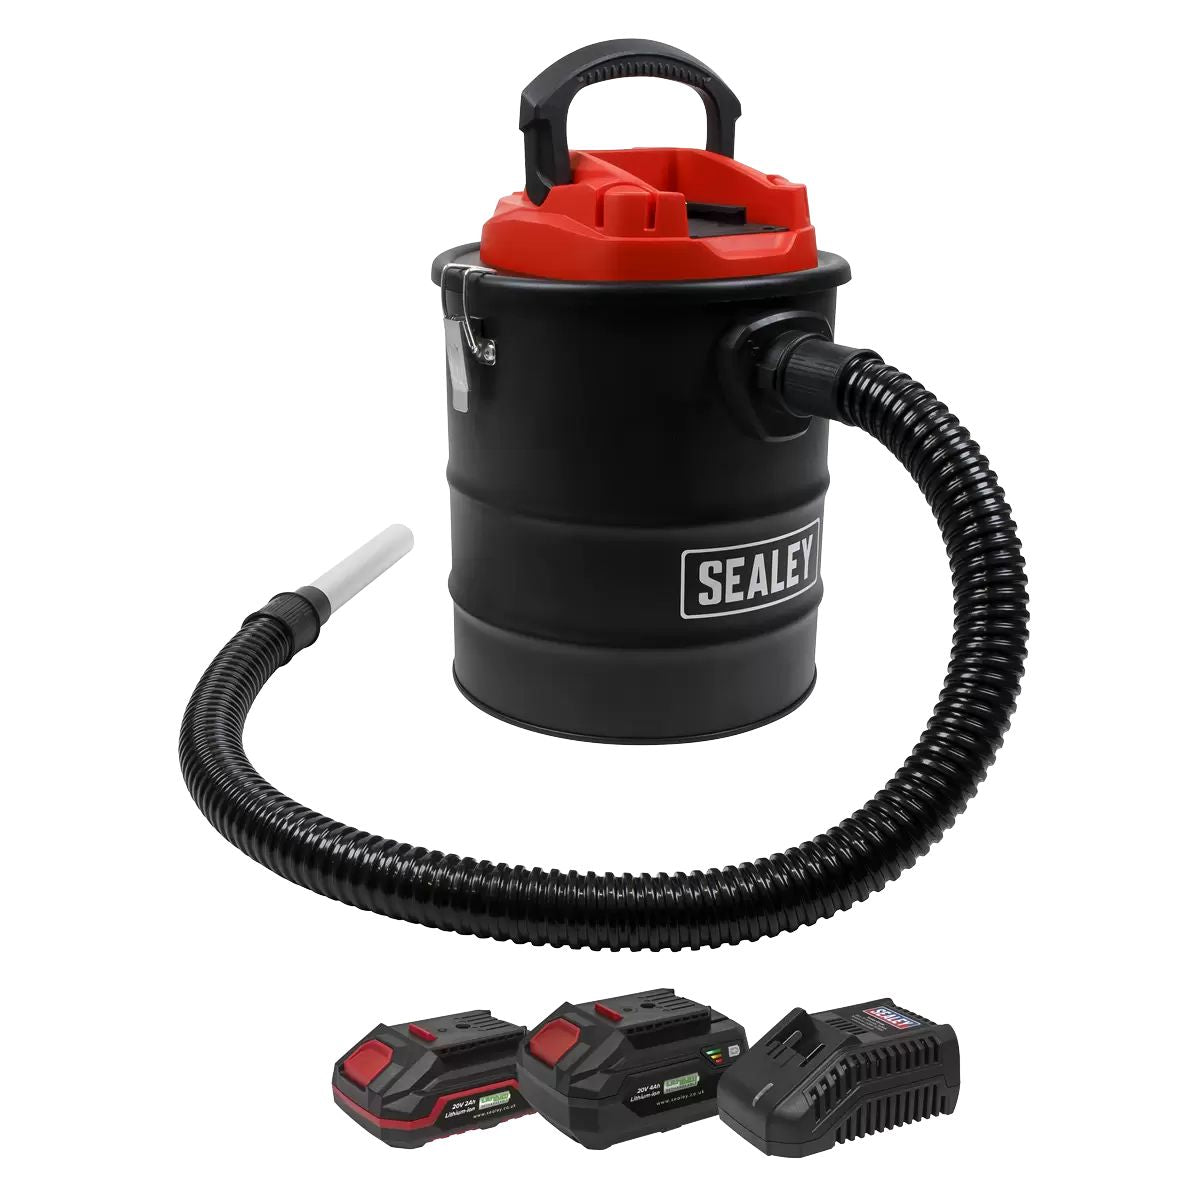 Sealey CP20VAVKIT 20V Handheld Ash 15L Vacuum Cleaner Kit 2 Batteries with charger